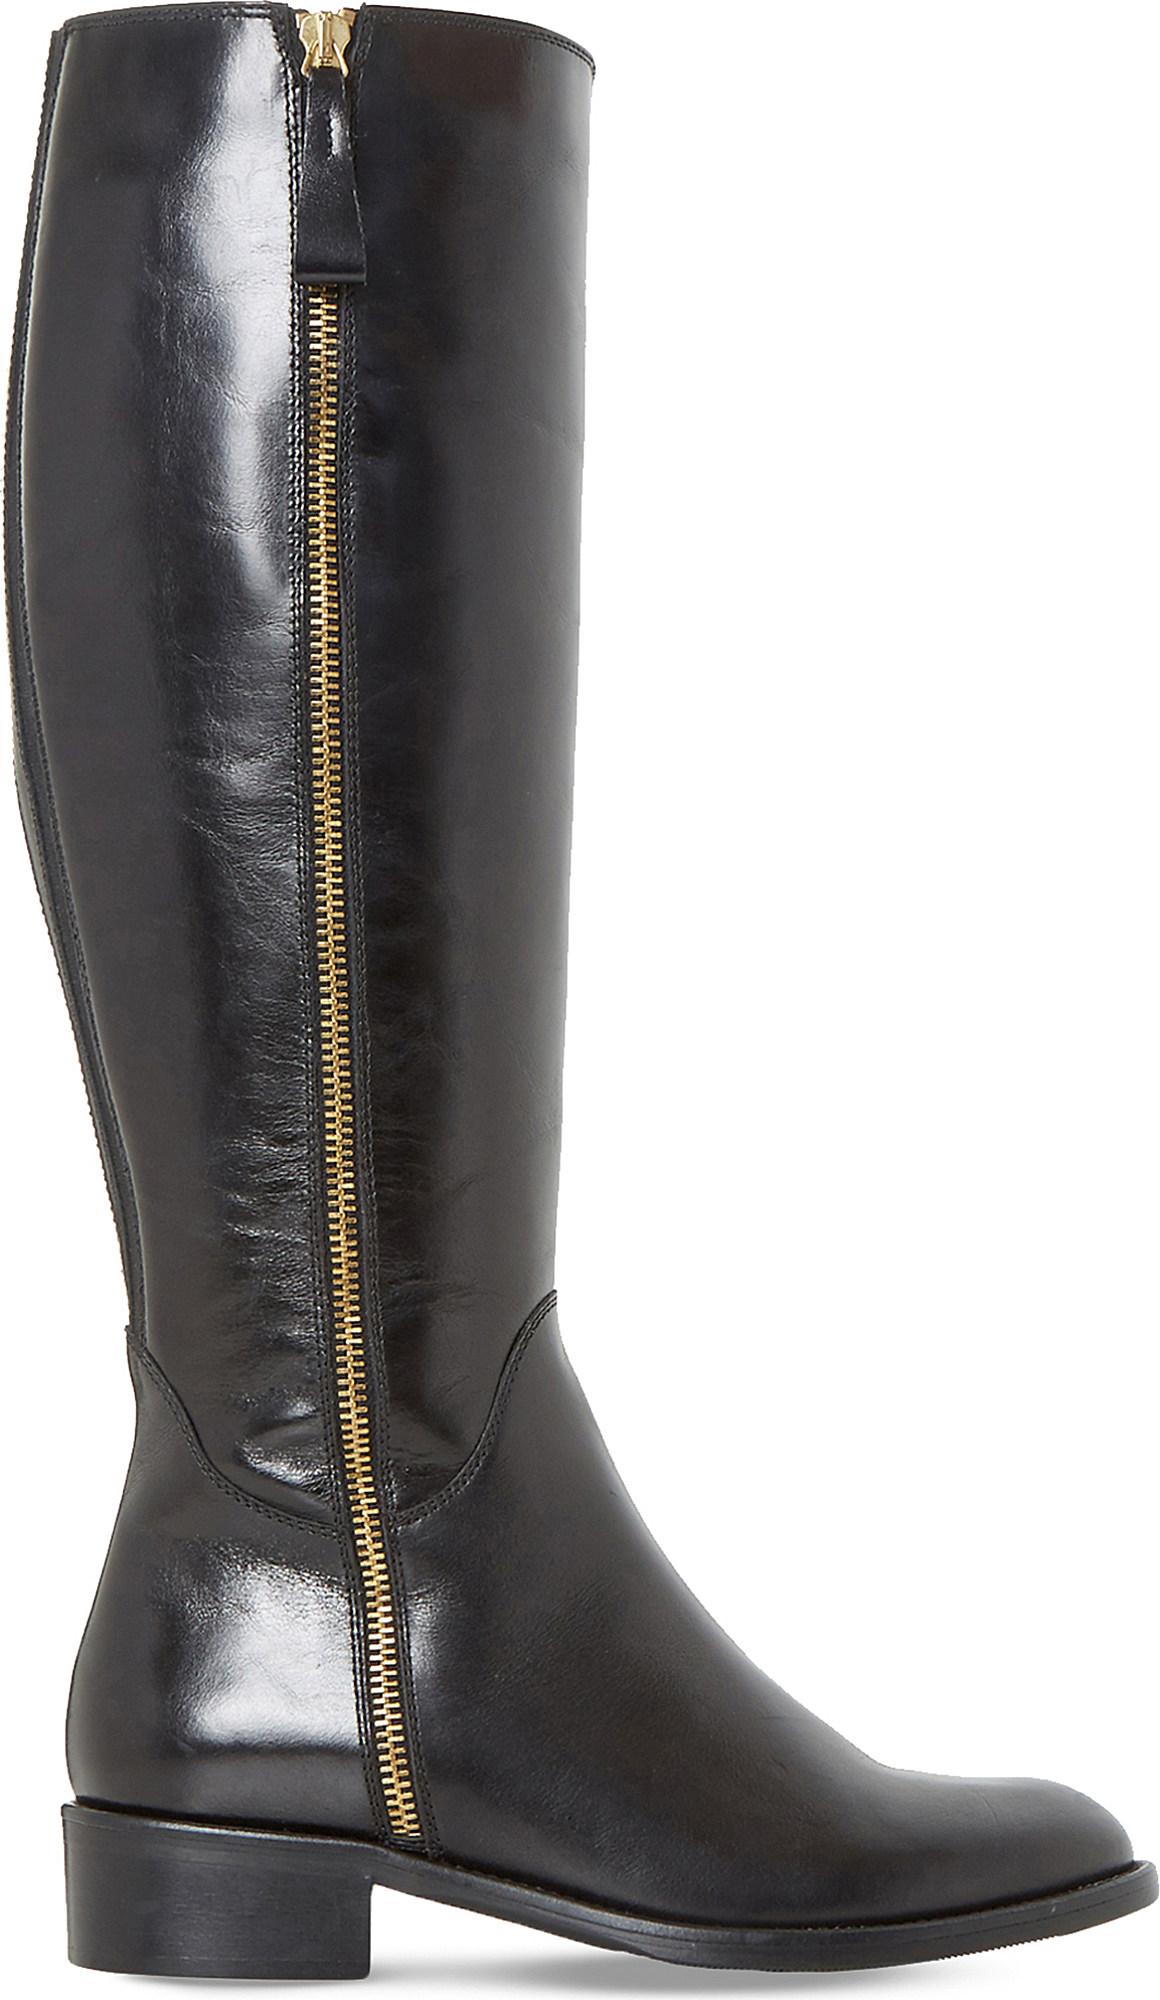 Dune Tillyy Leather Riding Boots in 